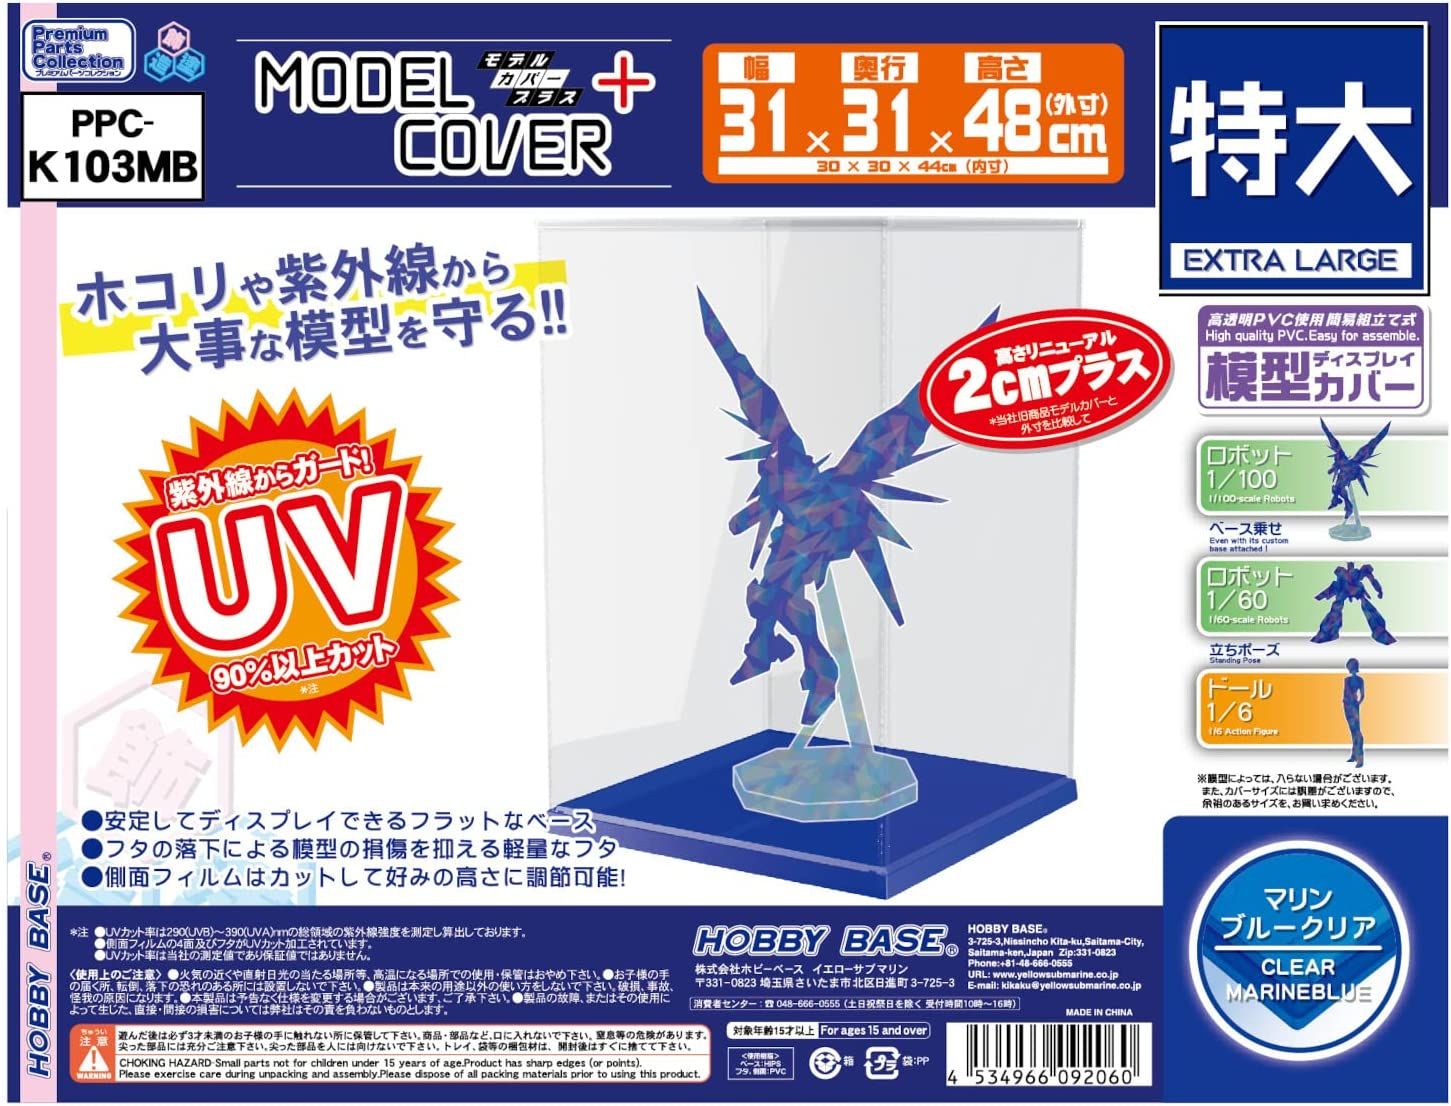 Hobby Base K103MB Model Cover Plus Extra Large Clear Marine Blue - BanzaiHobby